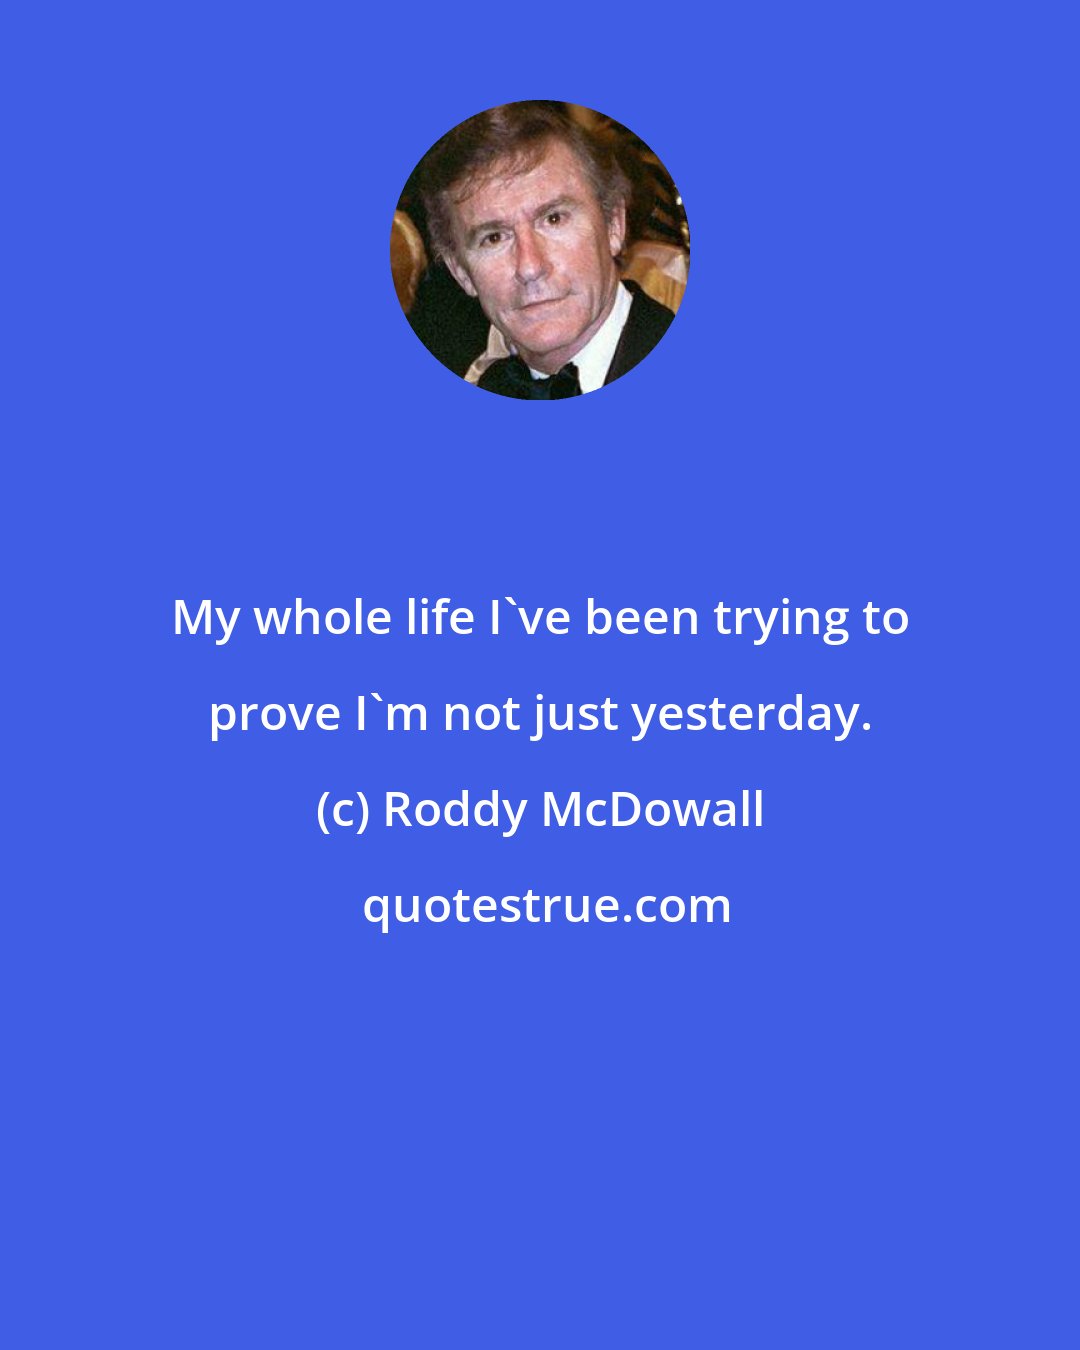 Roddy McDowall: My whole life I've been trying to prove I'm not just yesterday.